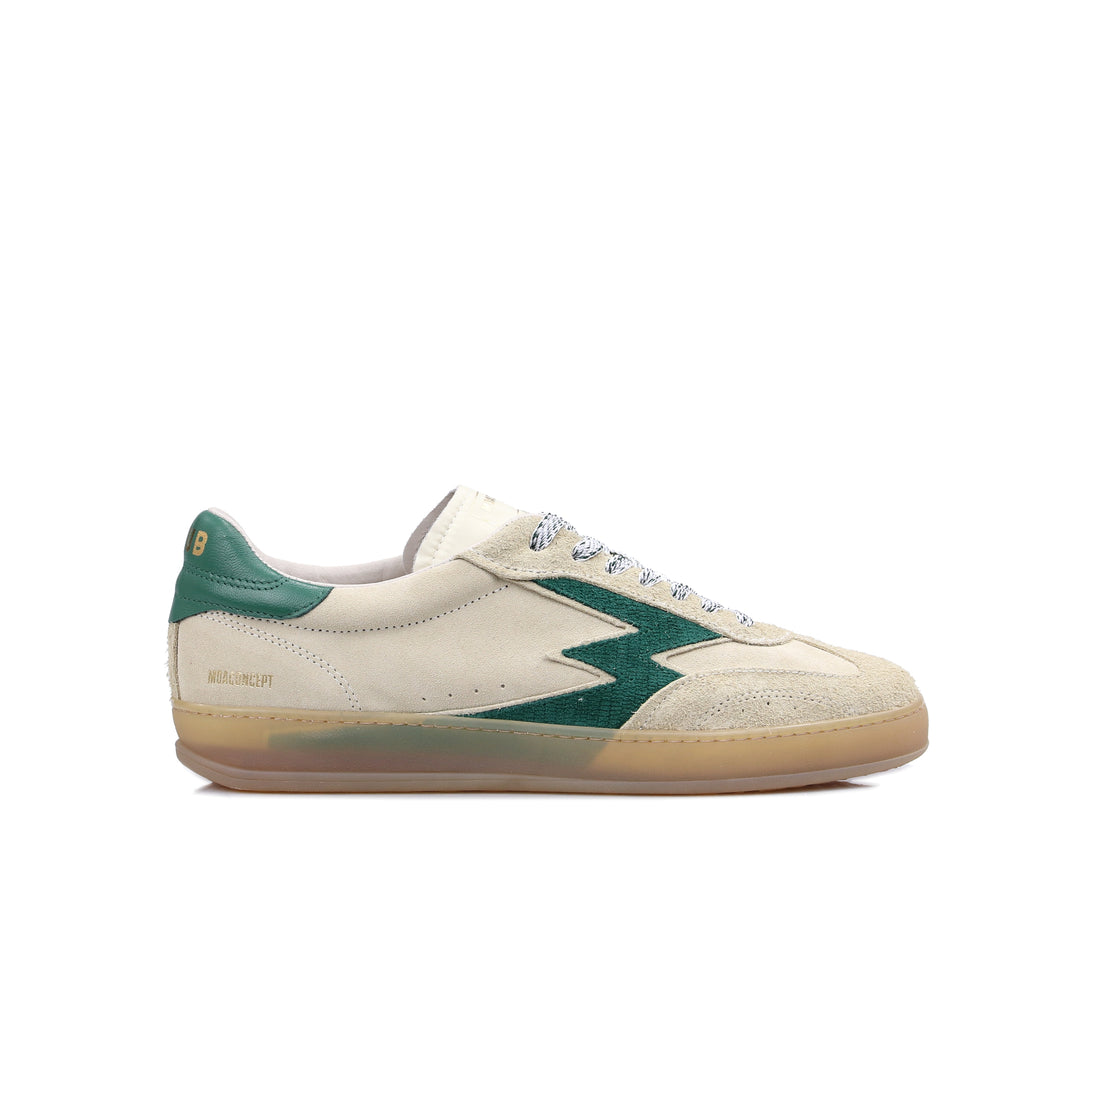 Sand Club sneaker with green logo